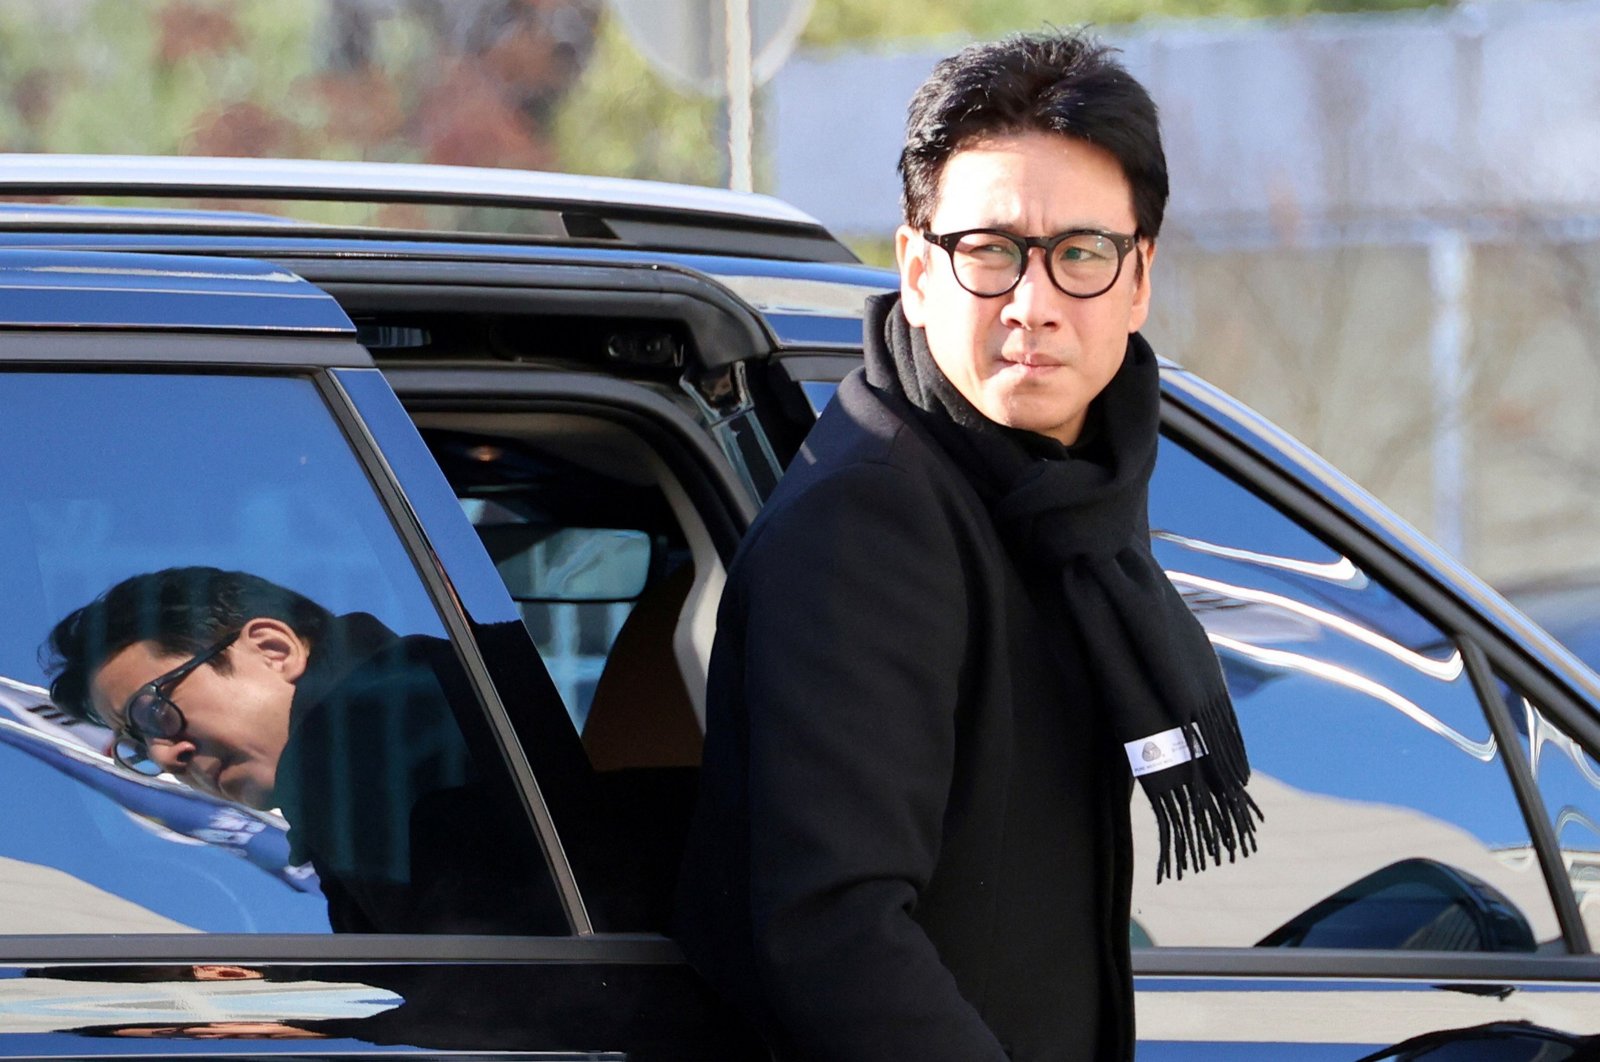 Lee Sun-kyun arriving at a police station in Incheon for his police questioning over his alleged use of marijuana and other psychoactive drugs, Incheon, South Korea, Dec. 23, 2023. (AFP Photo)